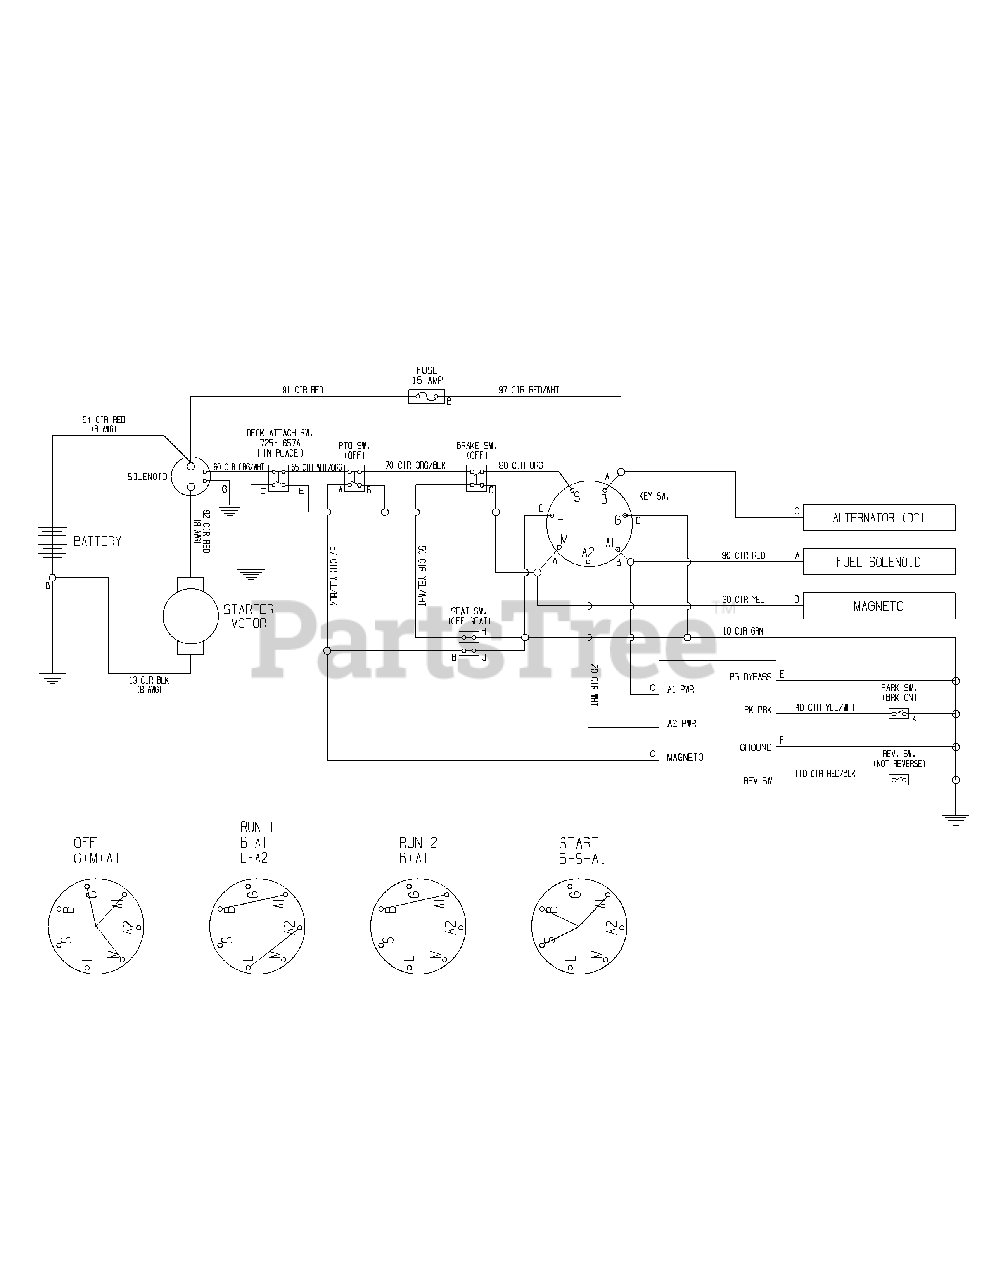 Wiring Diagram For Troy Bilt Riding Mower from www.partstree.com